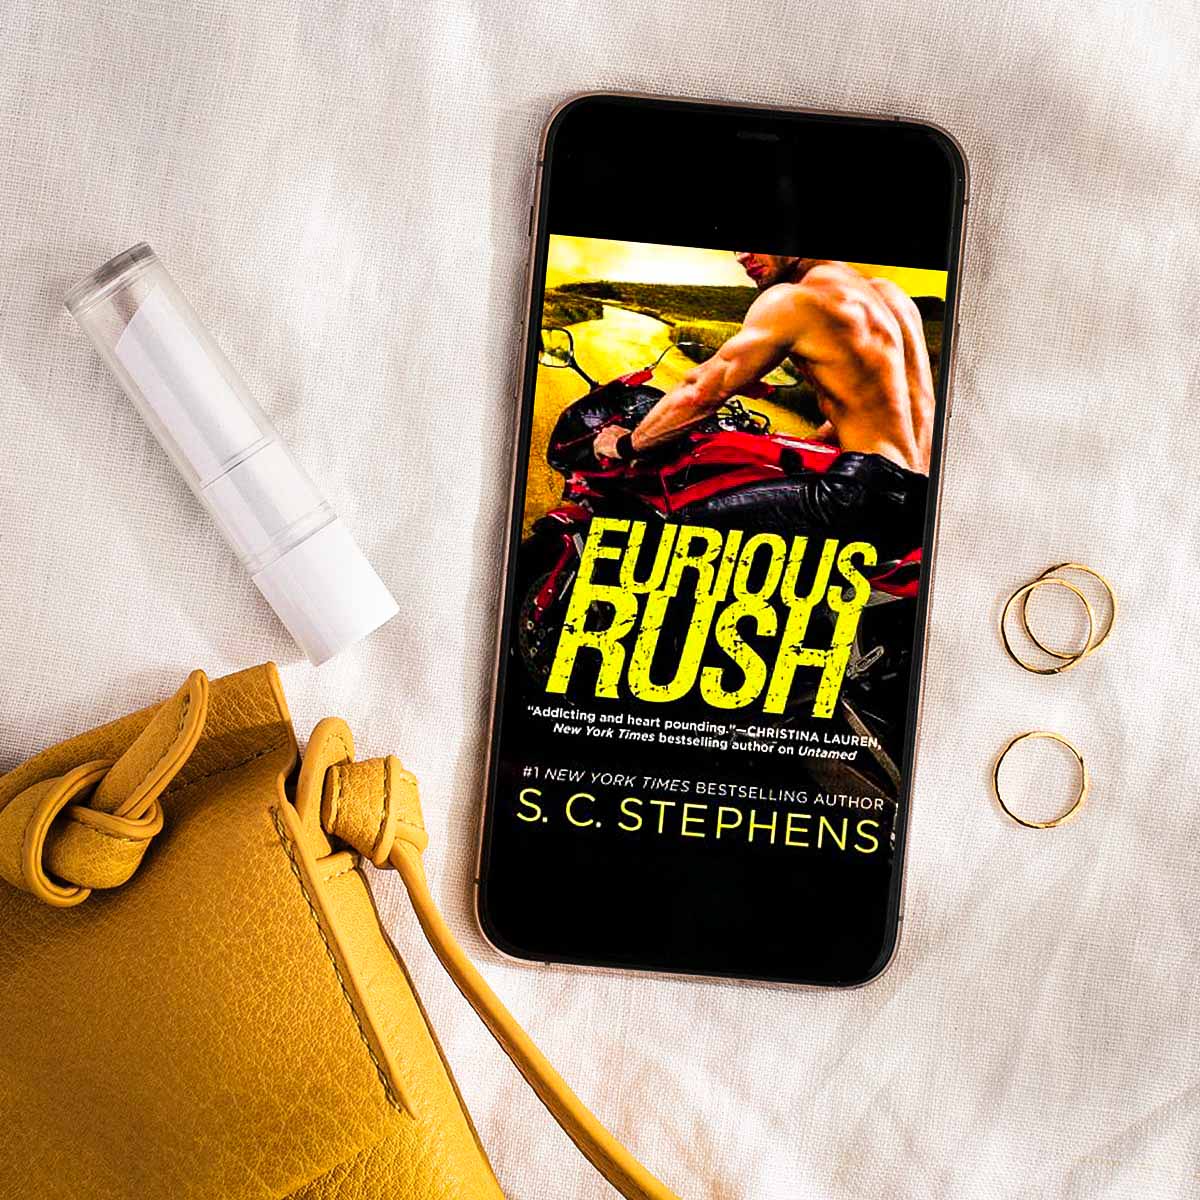 If you’re looking for a sports romance full of forbidden love, angst, and tension, check out this excerpt and grab a copy of Furious Rush by S.C. Stephens!